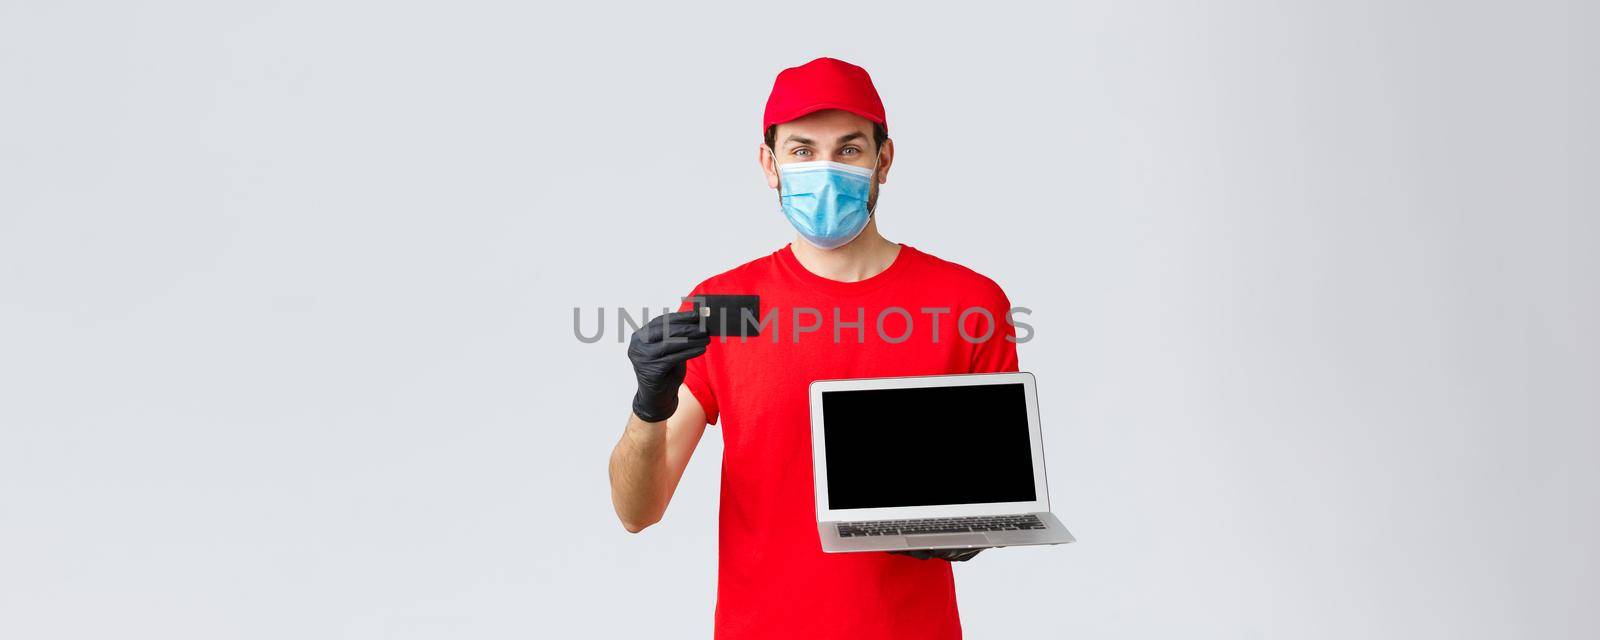 Customer support, covid-19 delivery packages, online orders processing concept. Smiling courier in red uniform cap and t-shirt, medical face mask, credit card paying for orders and show laptop by Benzoix